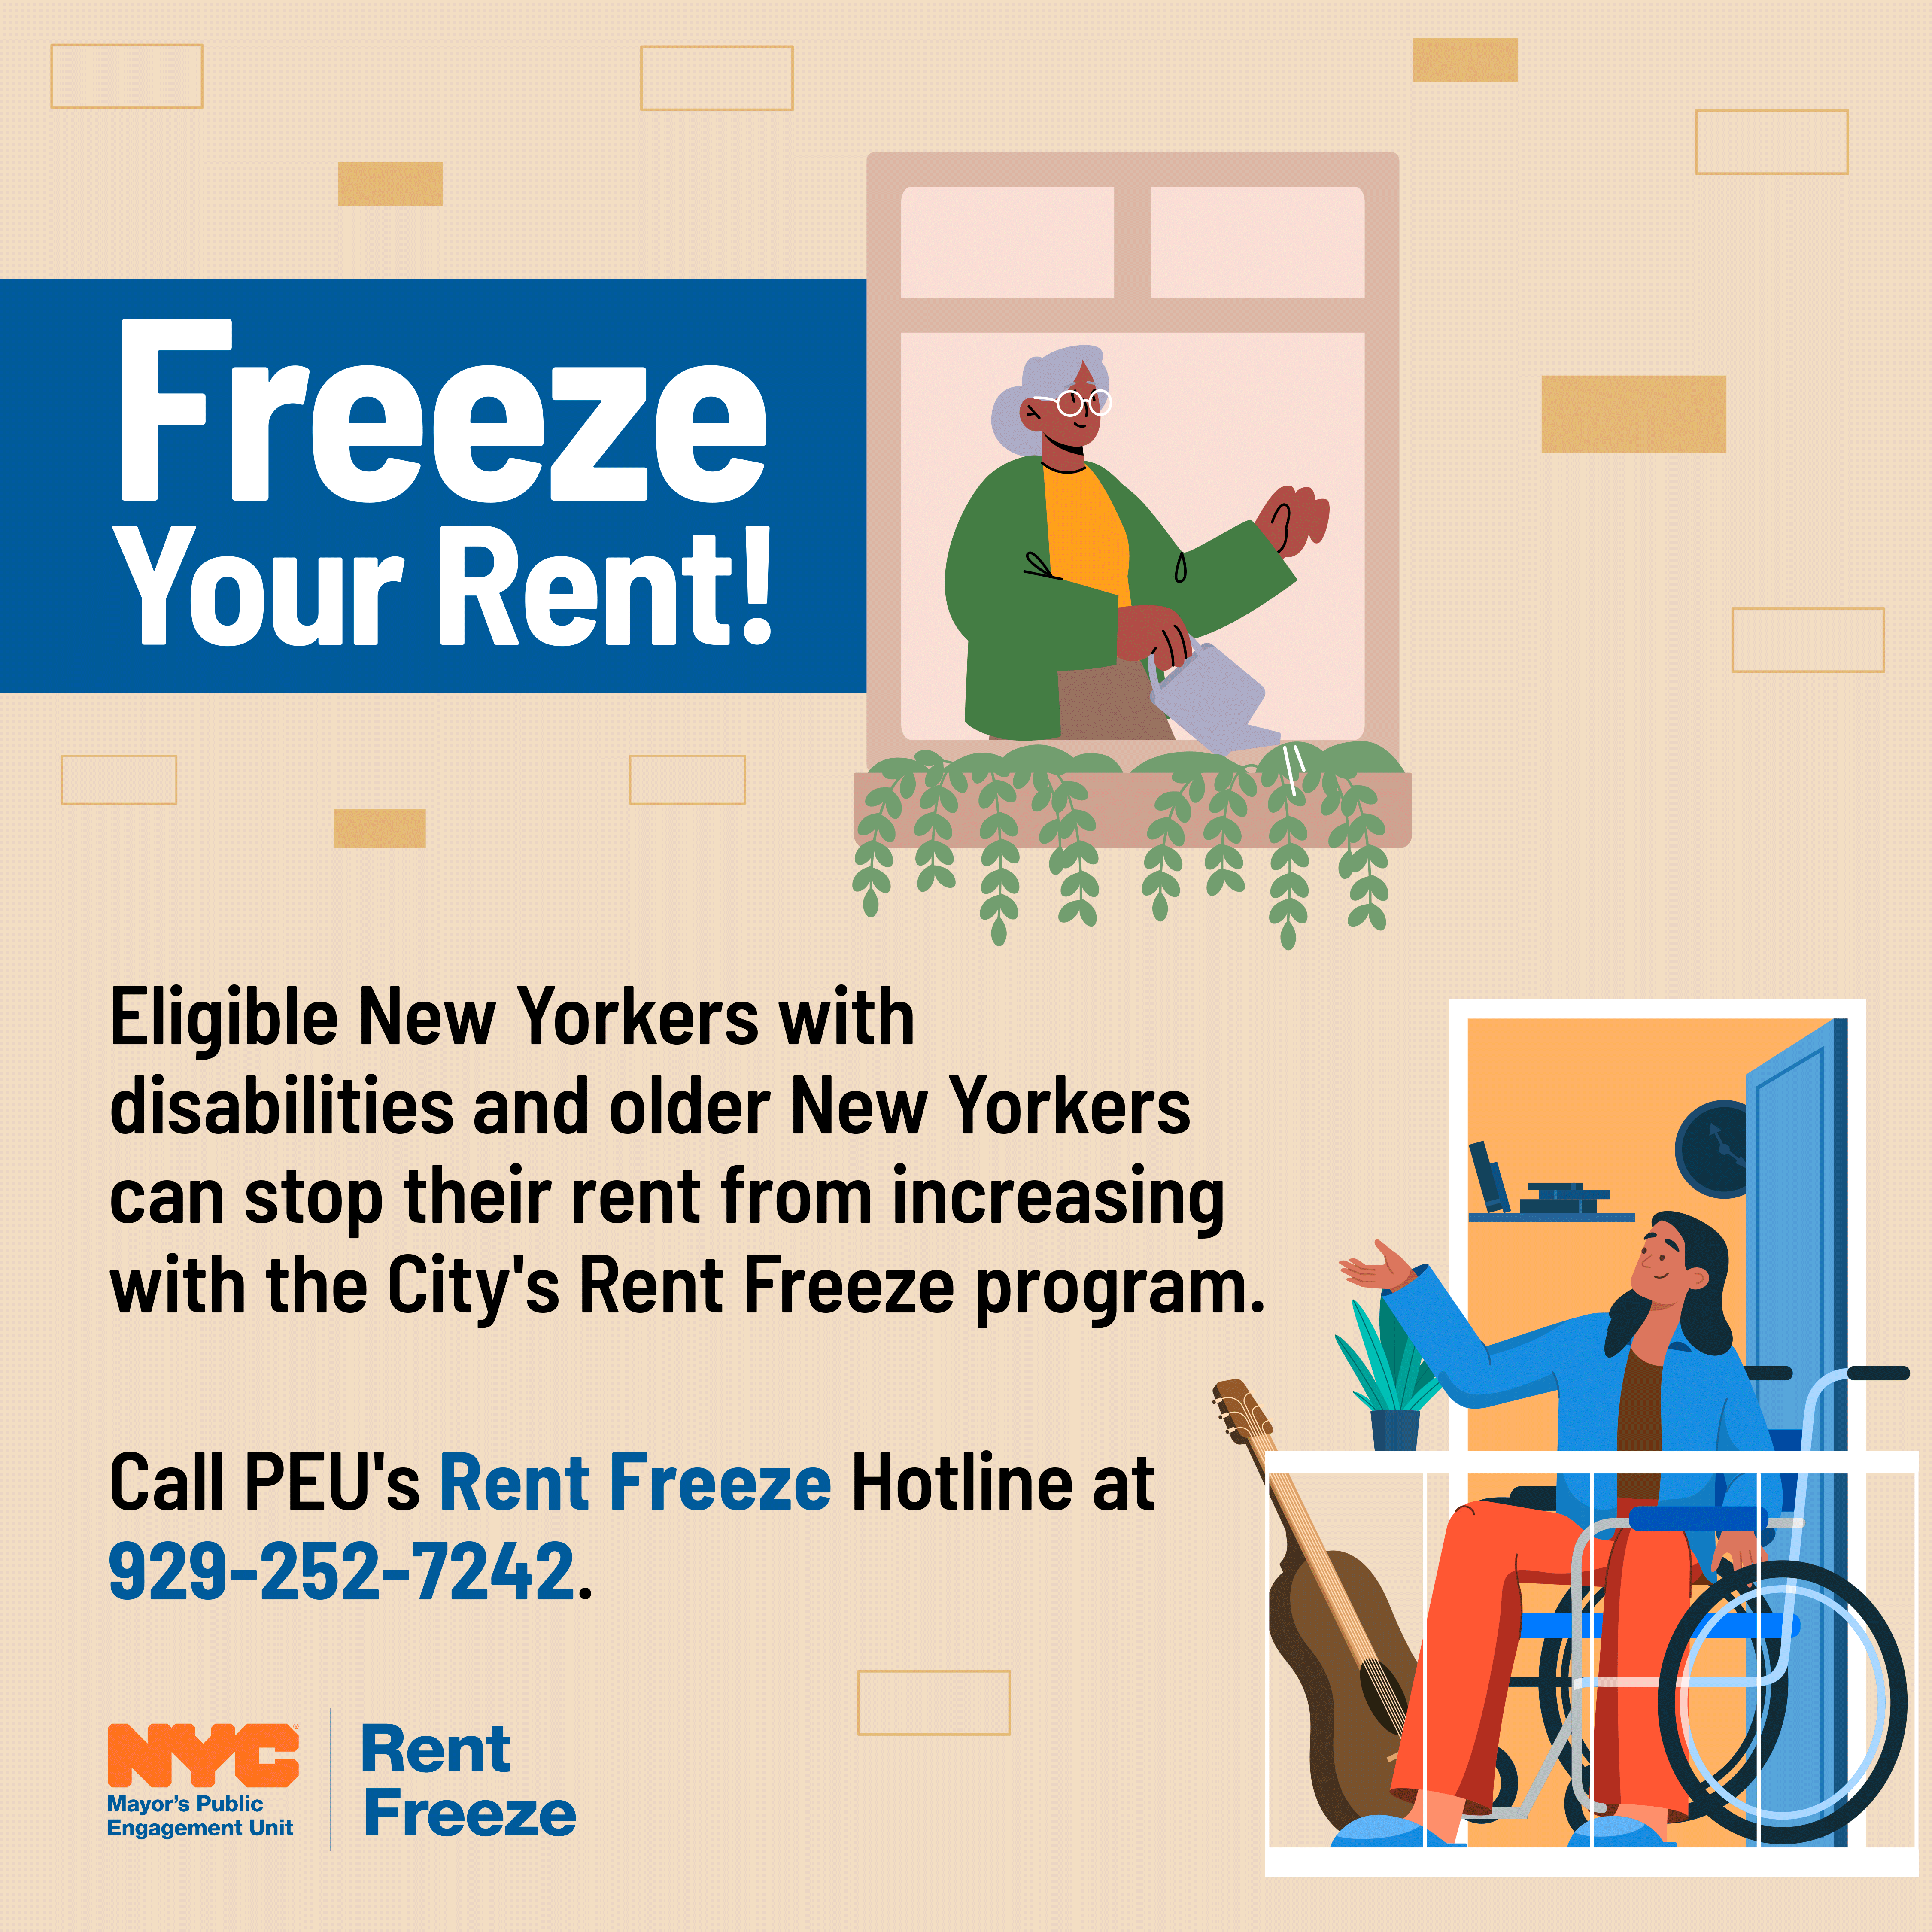 reeze your rent! Eligible New Yorkers with disabilities and older New Yorkers can stop their rent from increasing with the City's Rent Freeze program. Call PEU's Rent Freeze Hotline at 929-252-7242. Illustration of an older woman watering plants in her apartment window and a person in a wheelchair on a balcony next to a guitar.